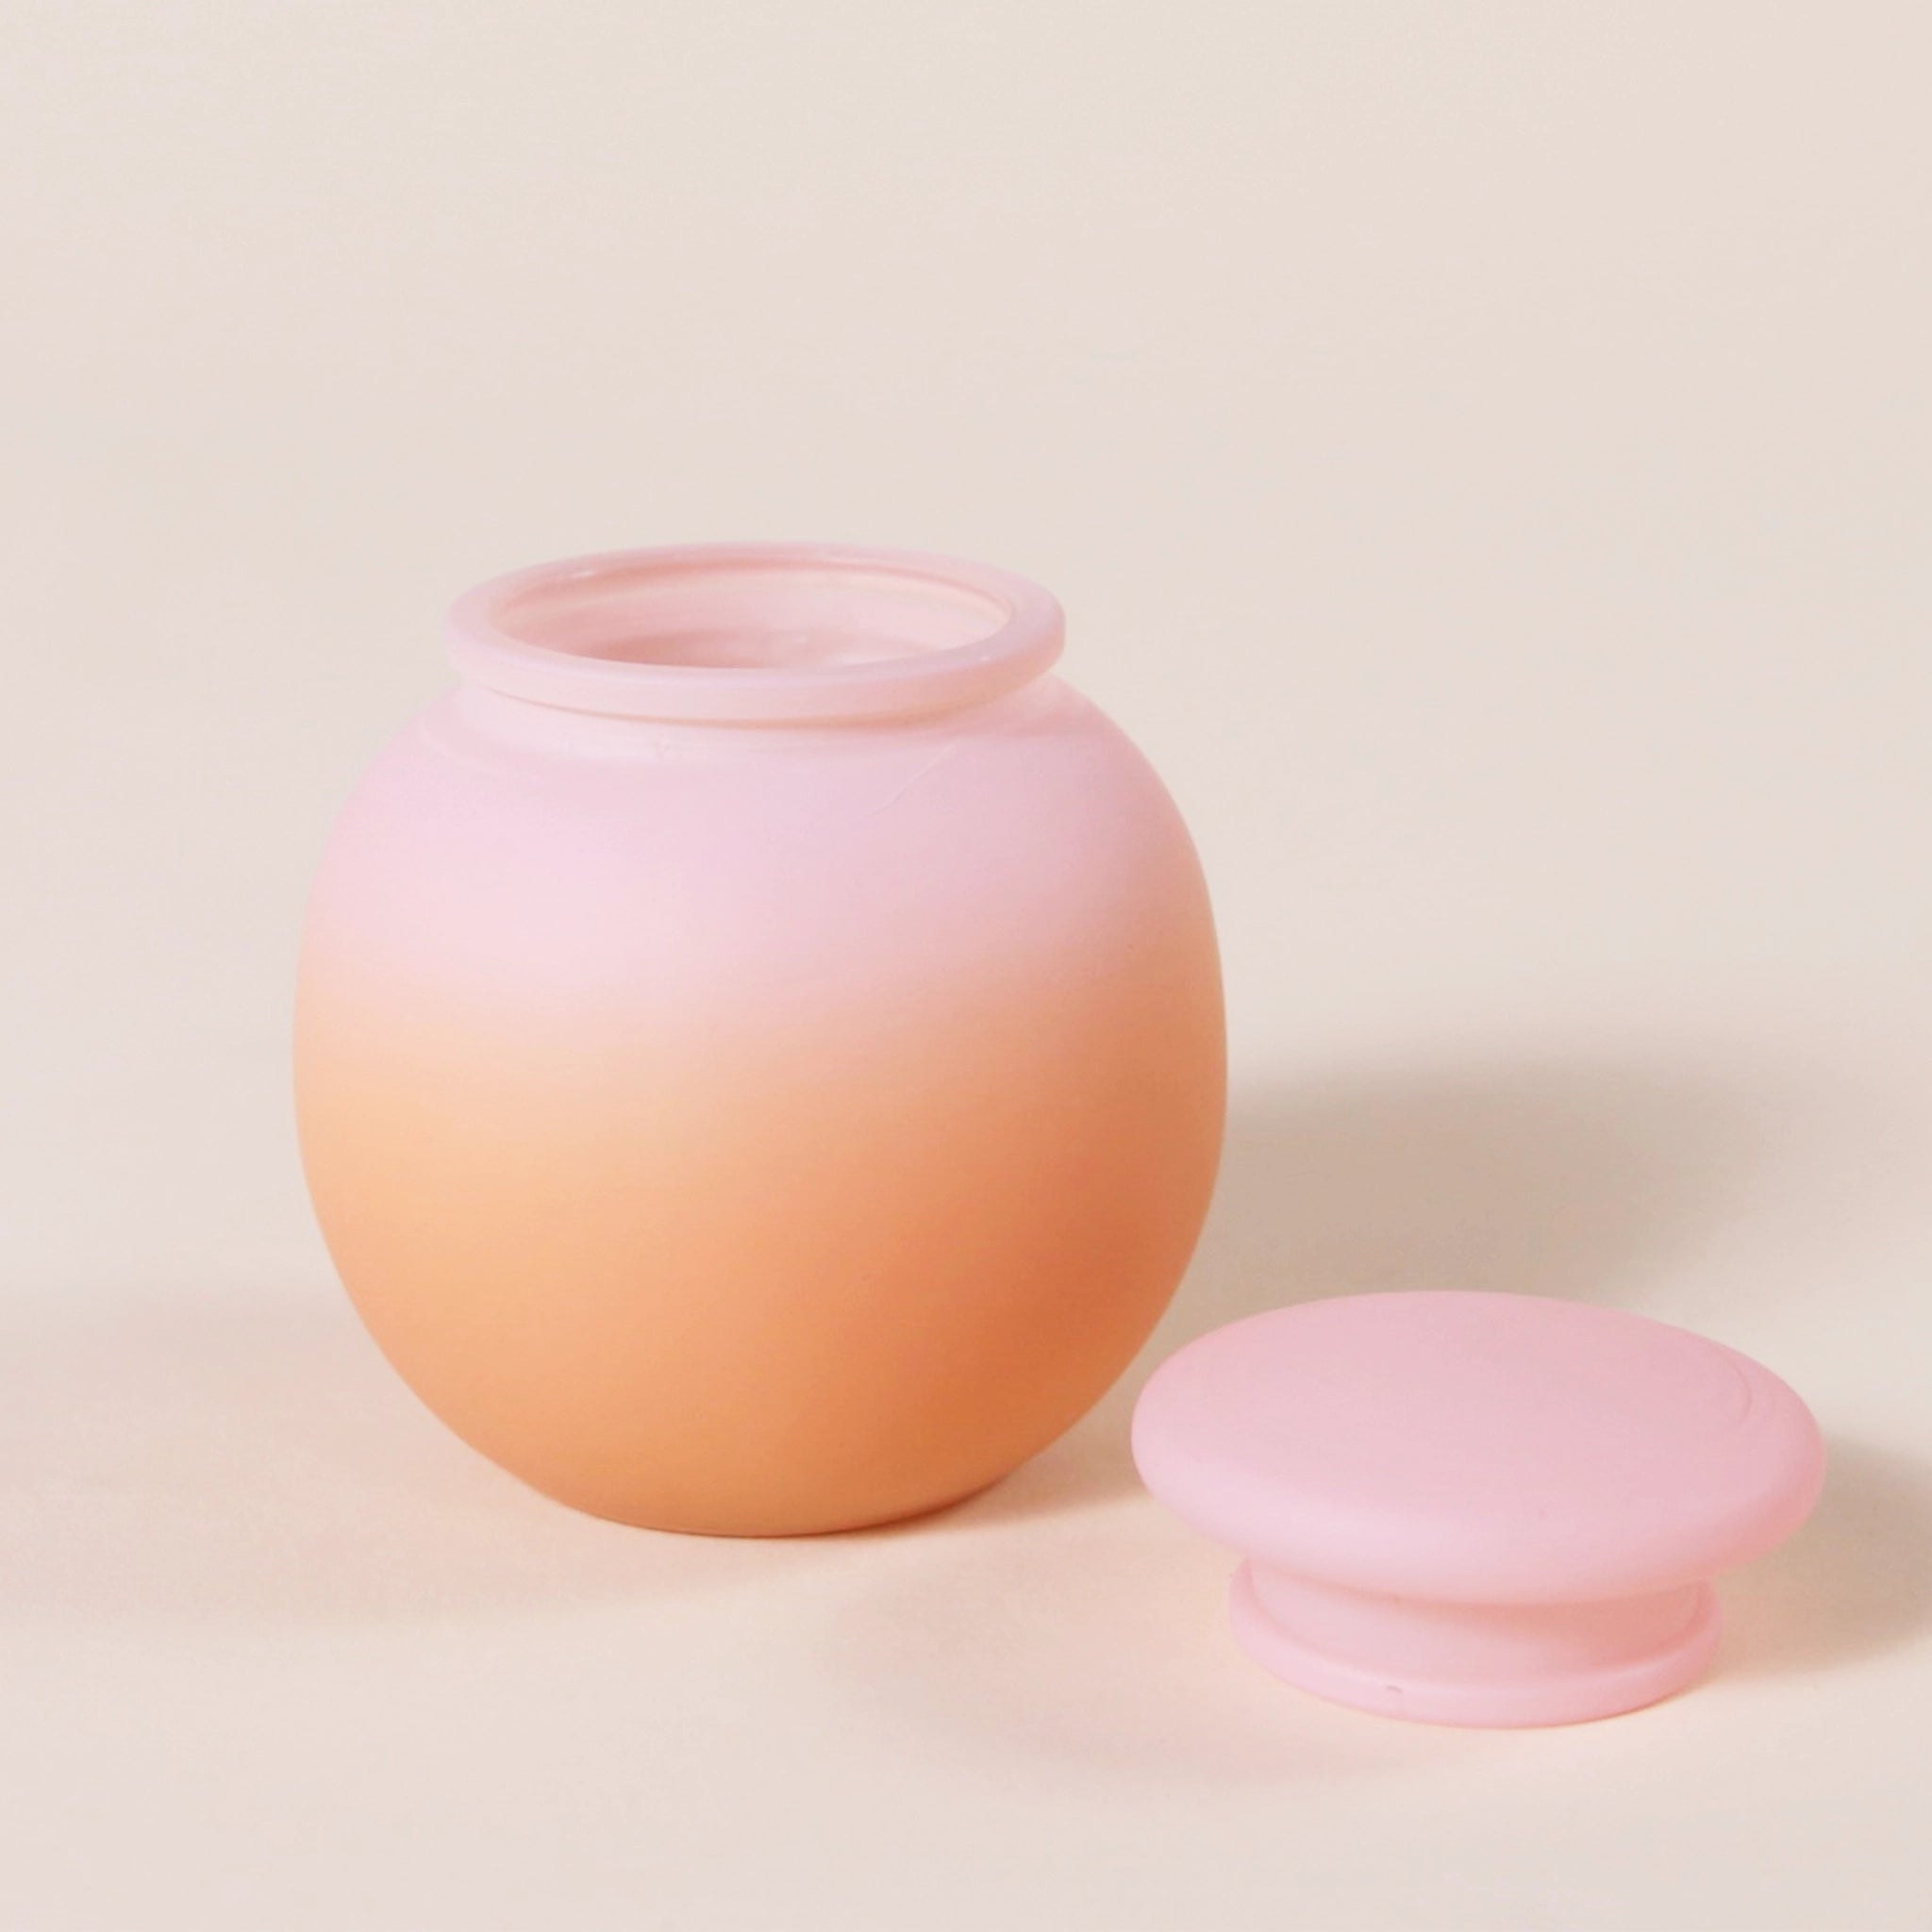 A round glass candle with a pink to orange ombre frosted finish along with a rounded lid.